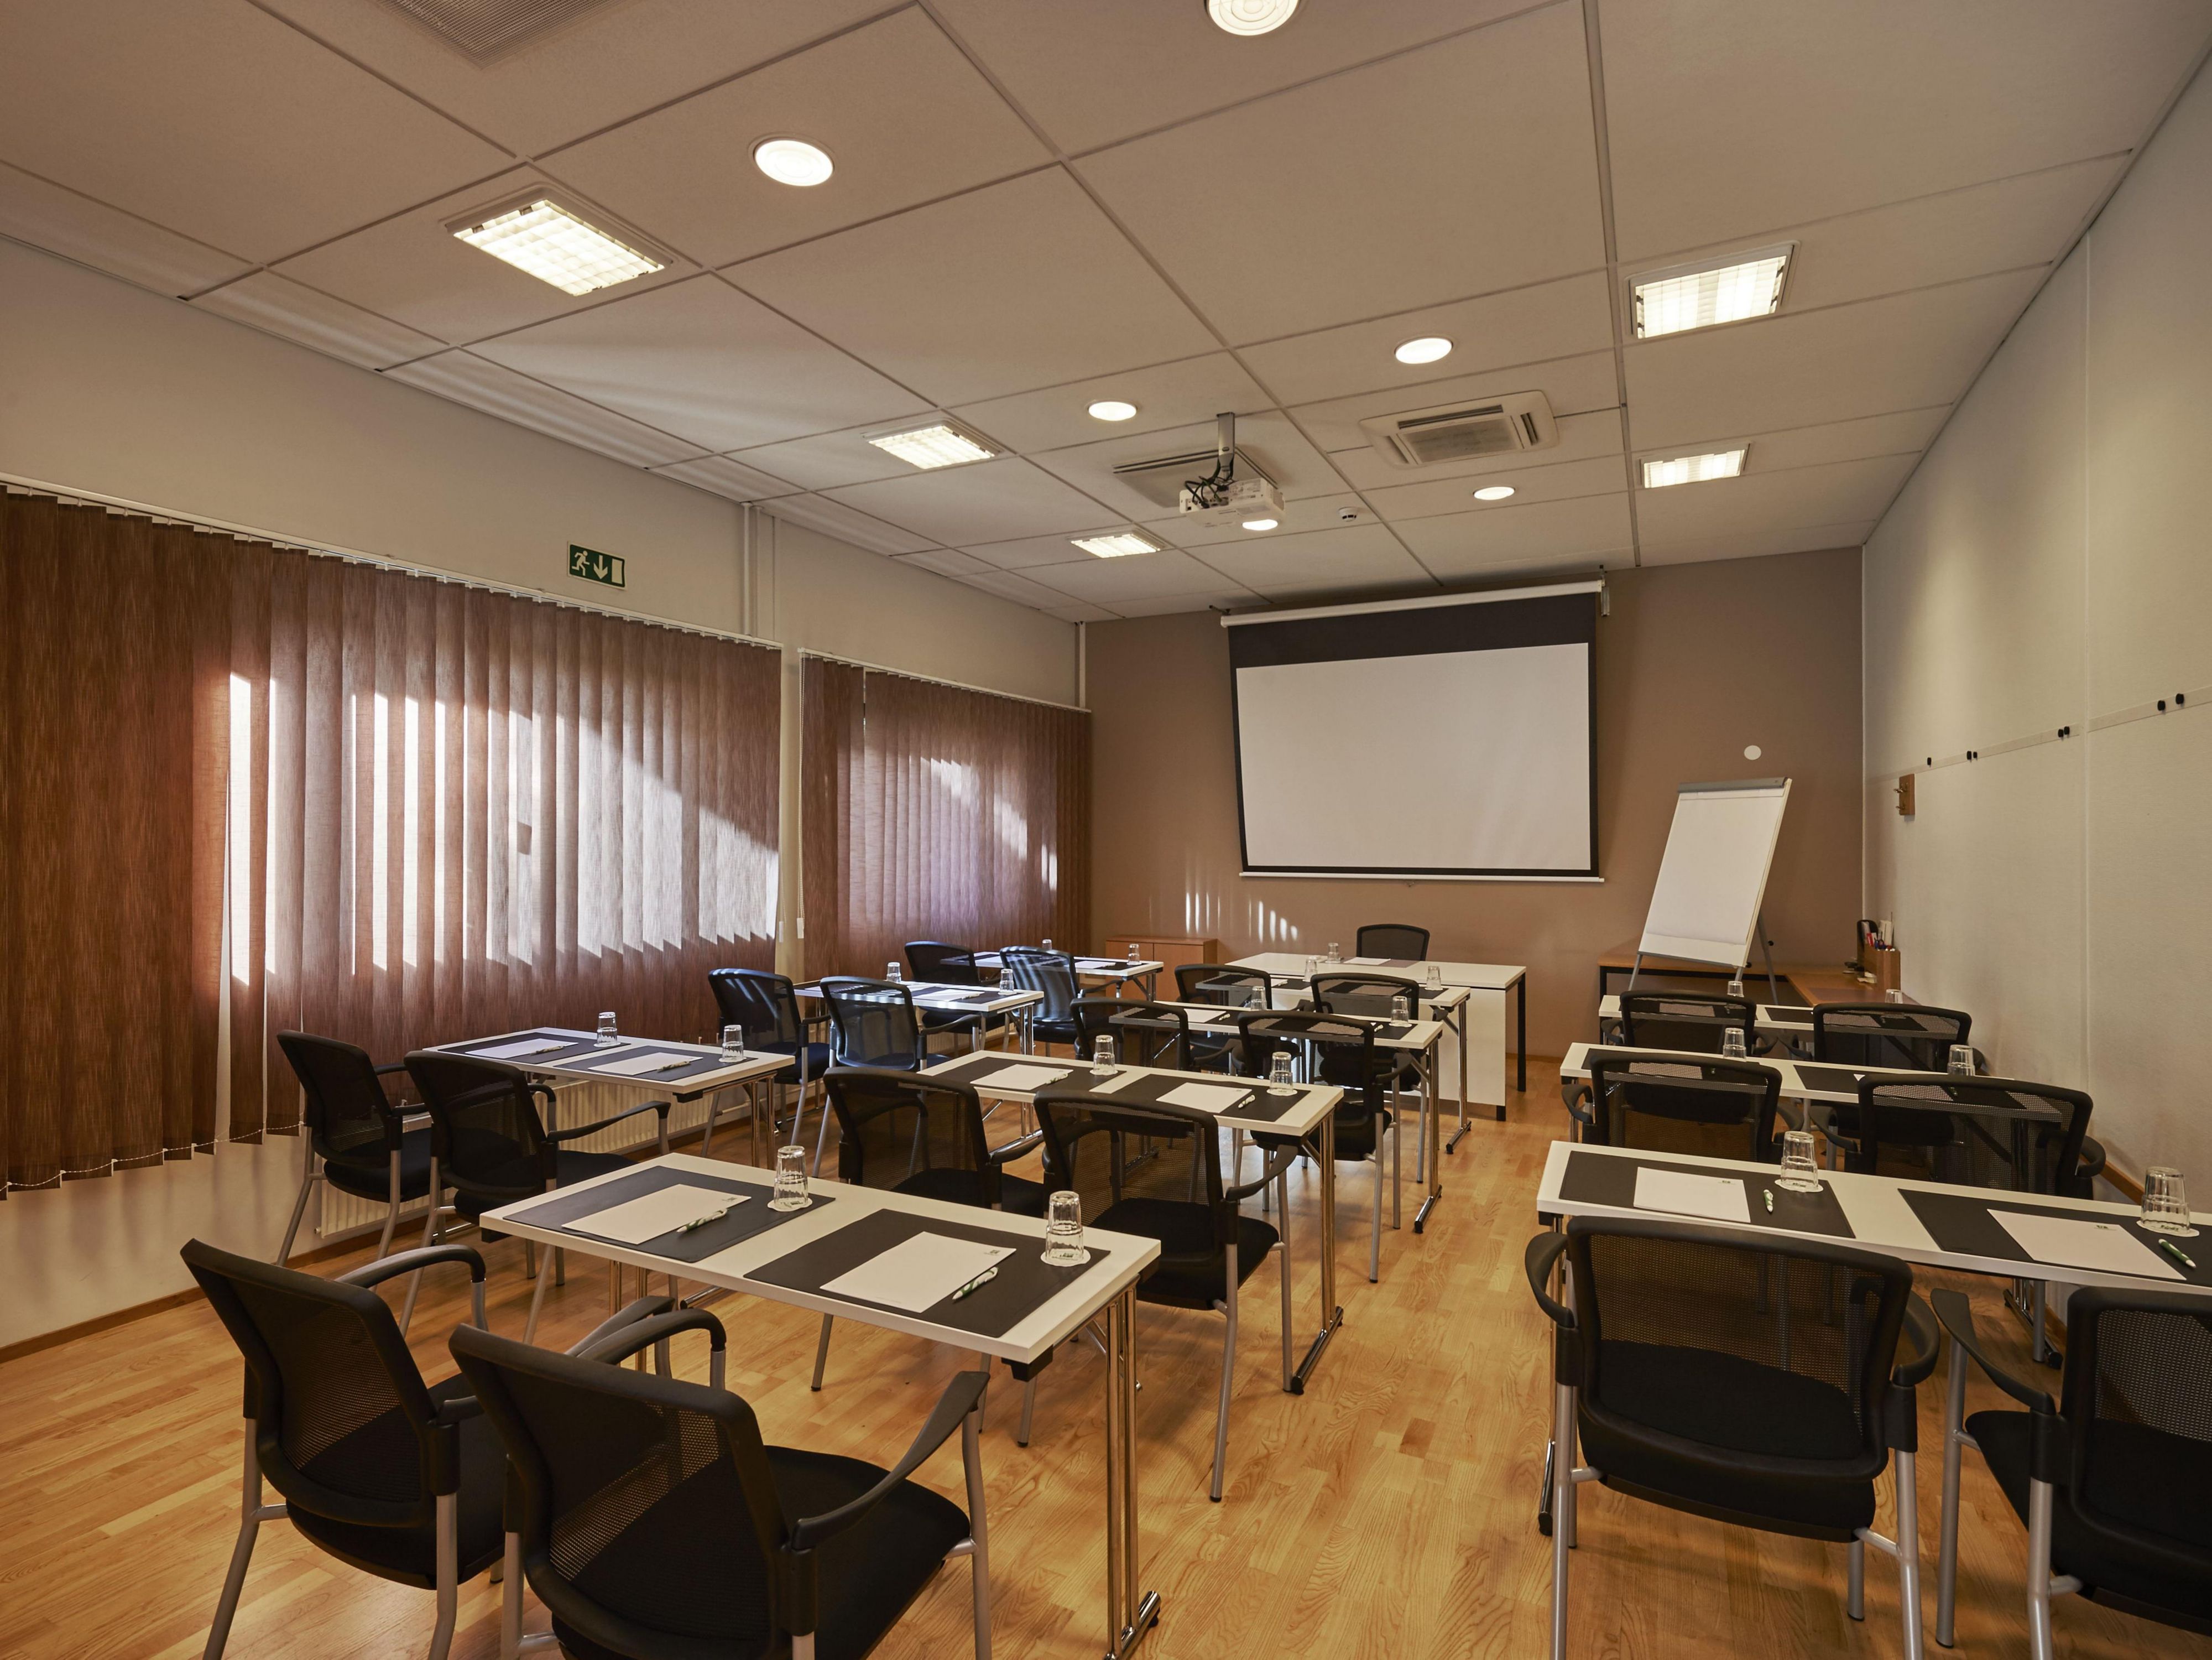 Our hotel's location near Helsinki-Vantaa Airport and Ring Road III makes it an easily accessible meeting point. Whether you arrive with us by airplane or car, it is easy to reach our hotel. Our seven meeting rooms work well for groups of two to 26 people. All our meeting rooms have complimentary Internet access. Contact us for more details.